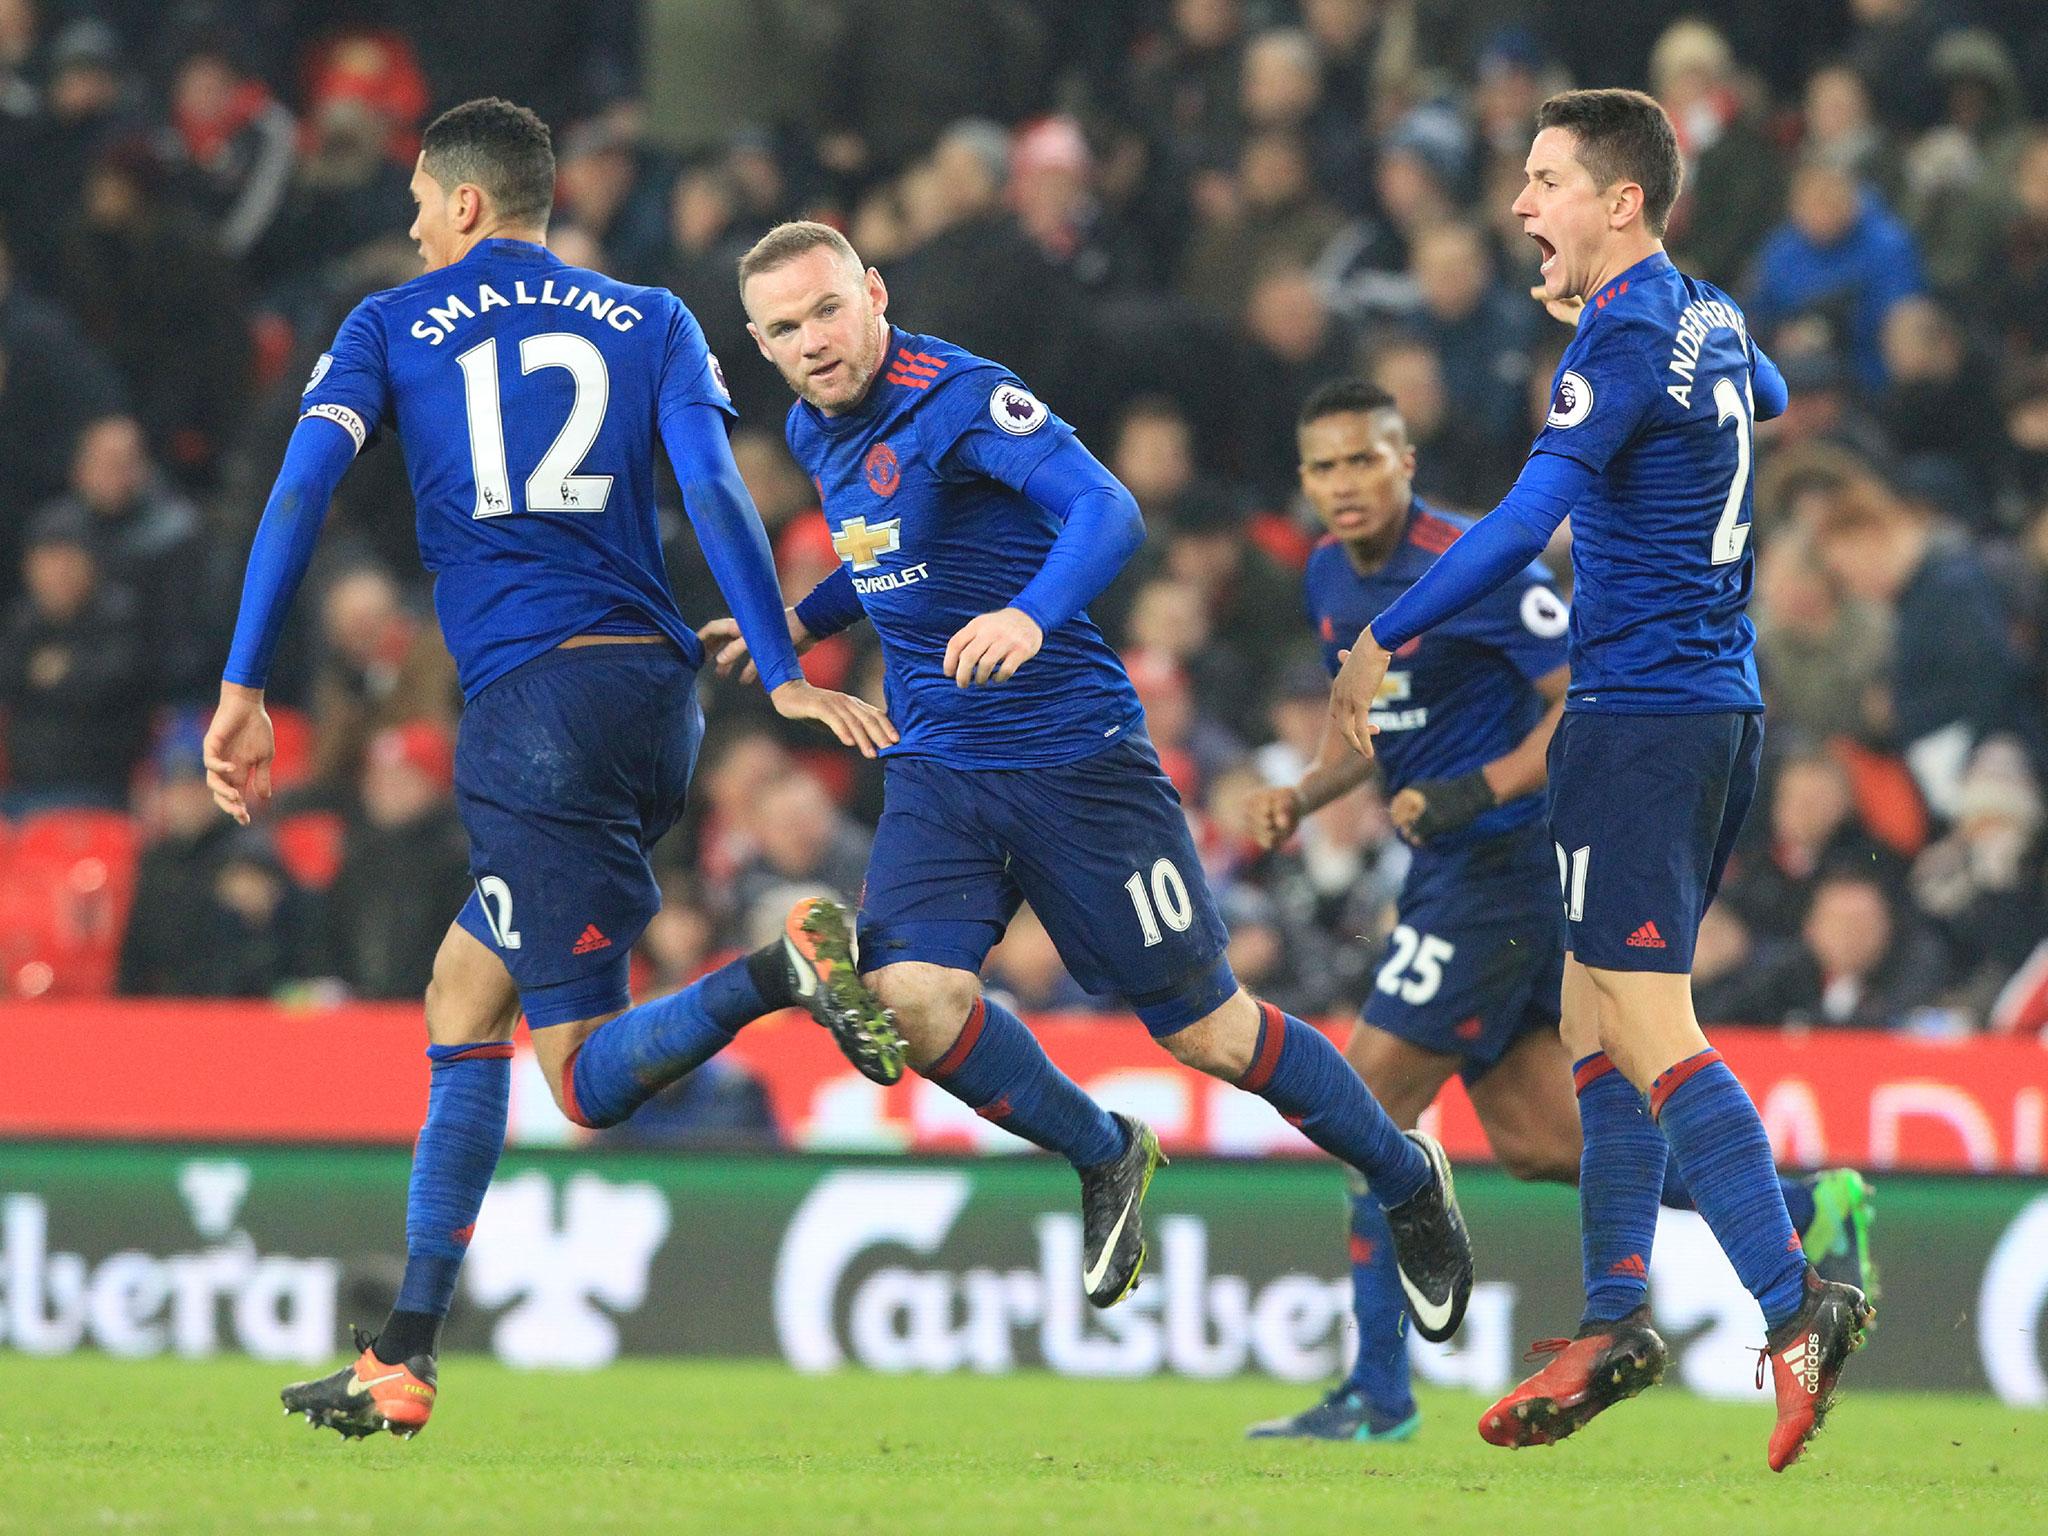 Wayne Rooney celebrates scoring his club-record 250th goal for Manchester United